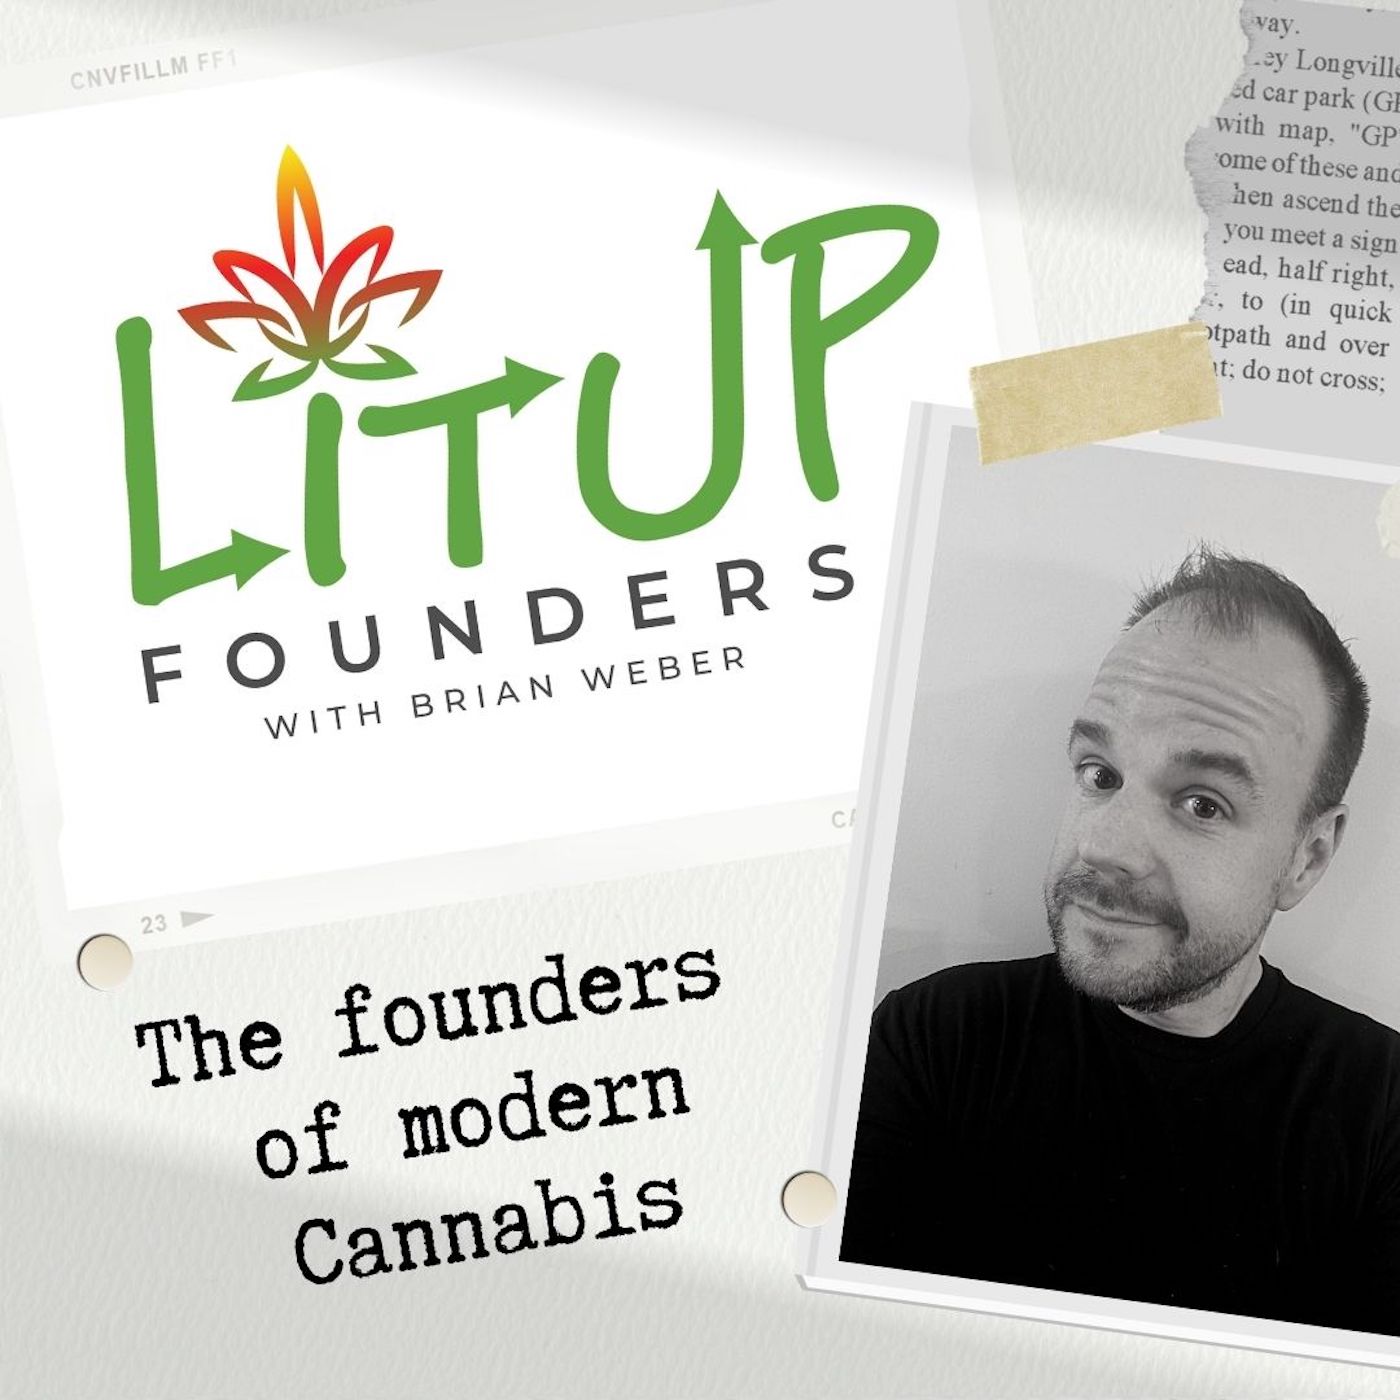 Artwork for Lit Up Founders